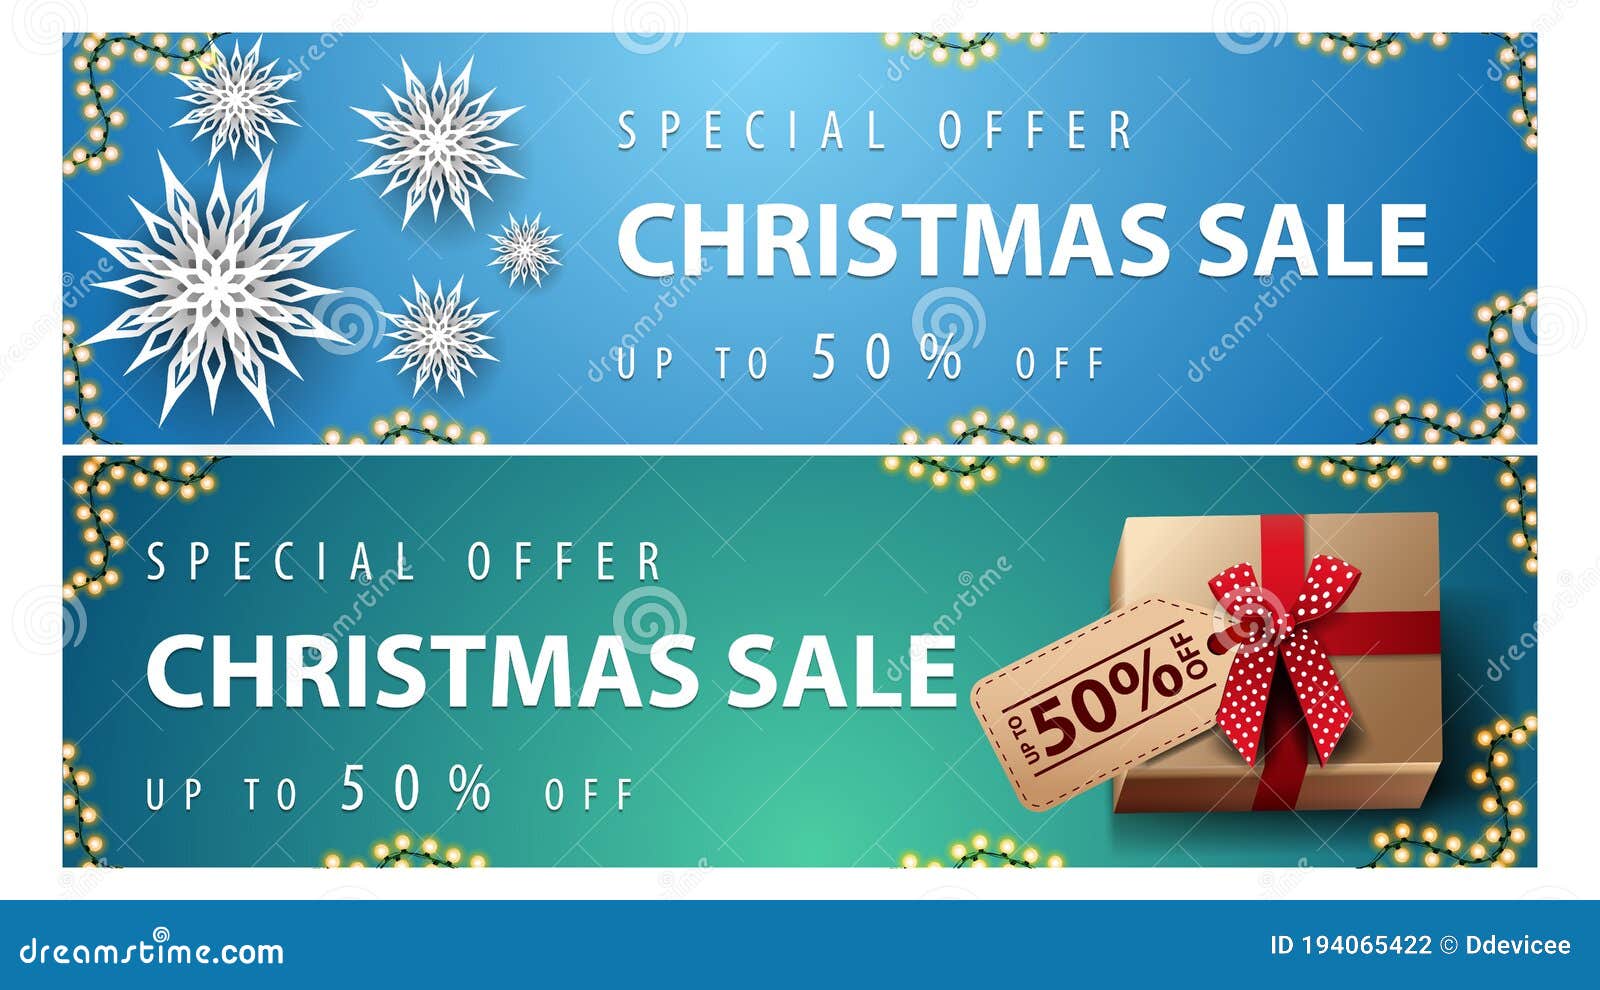 Special Offer, Christmas Sale, Up To 50 Off, Blue and Green Horizontal ...